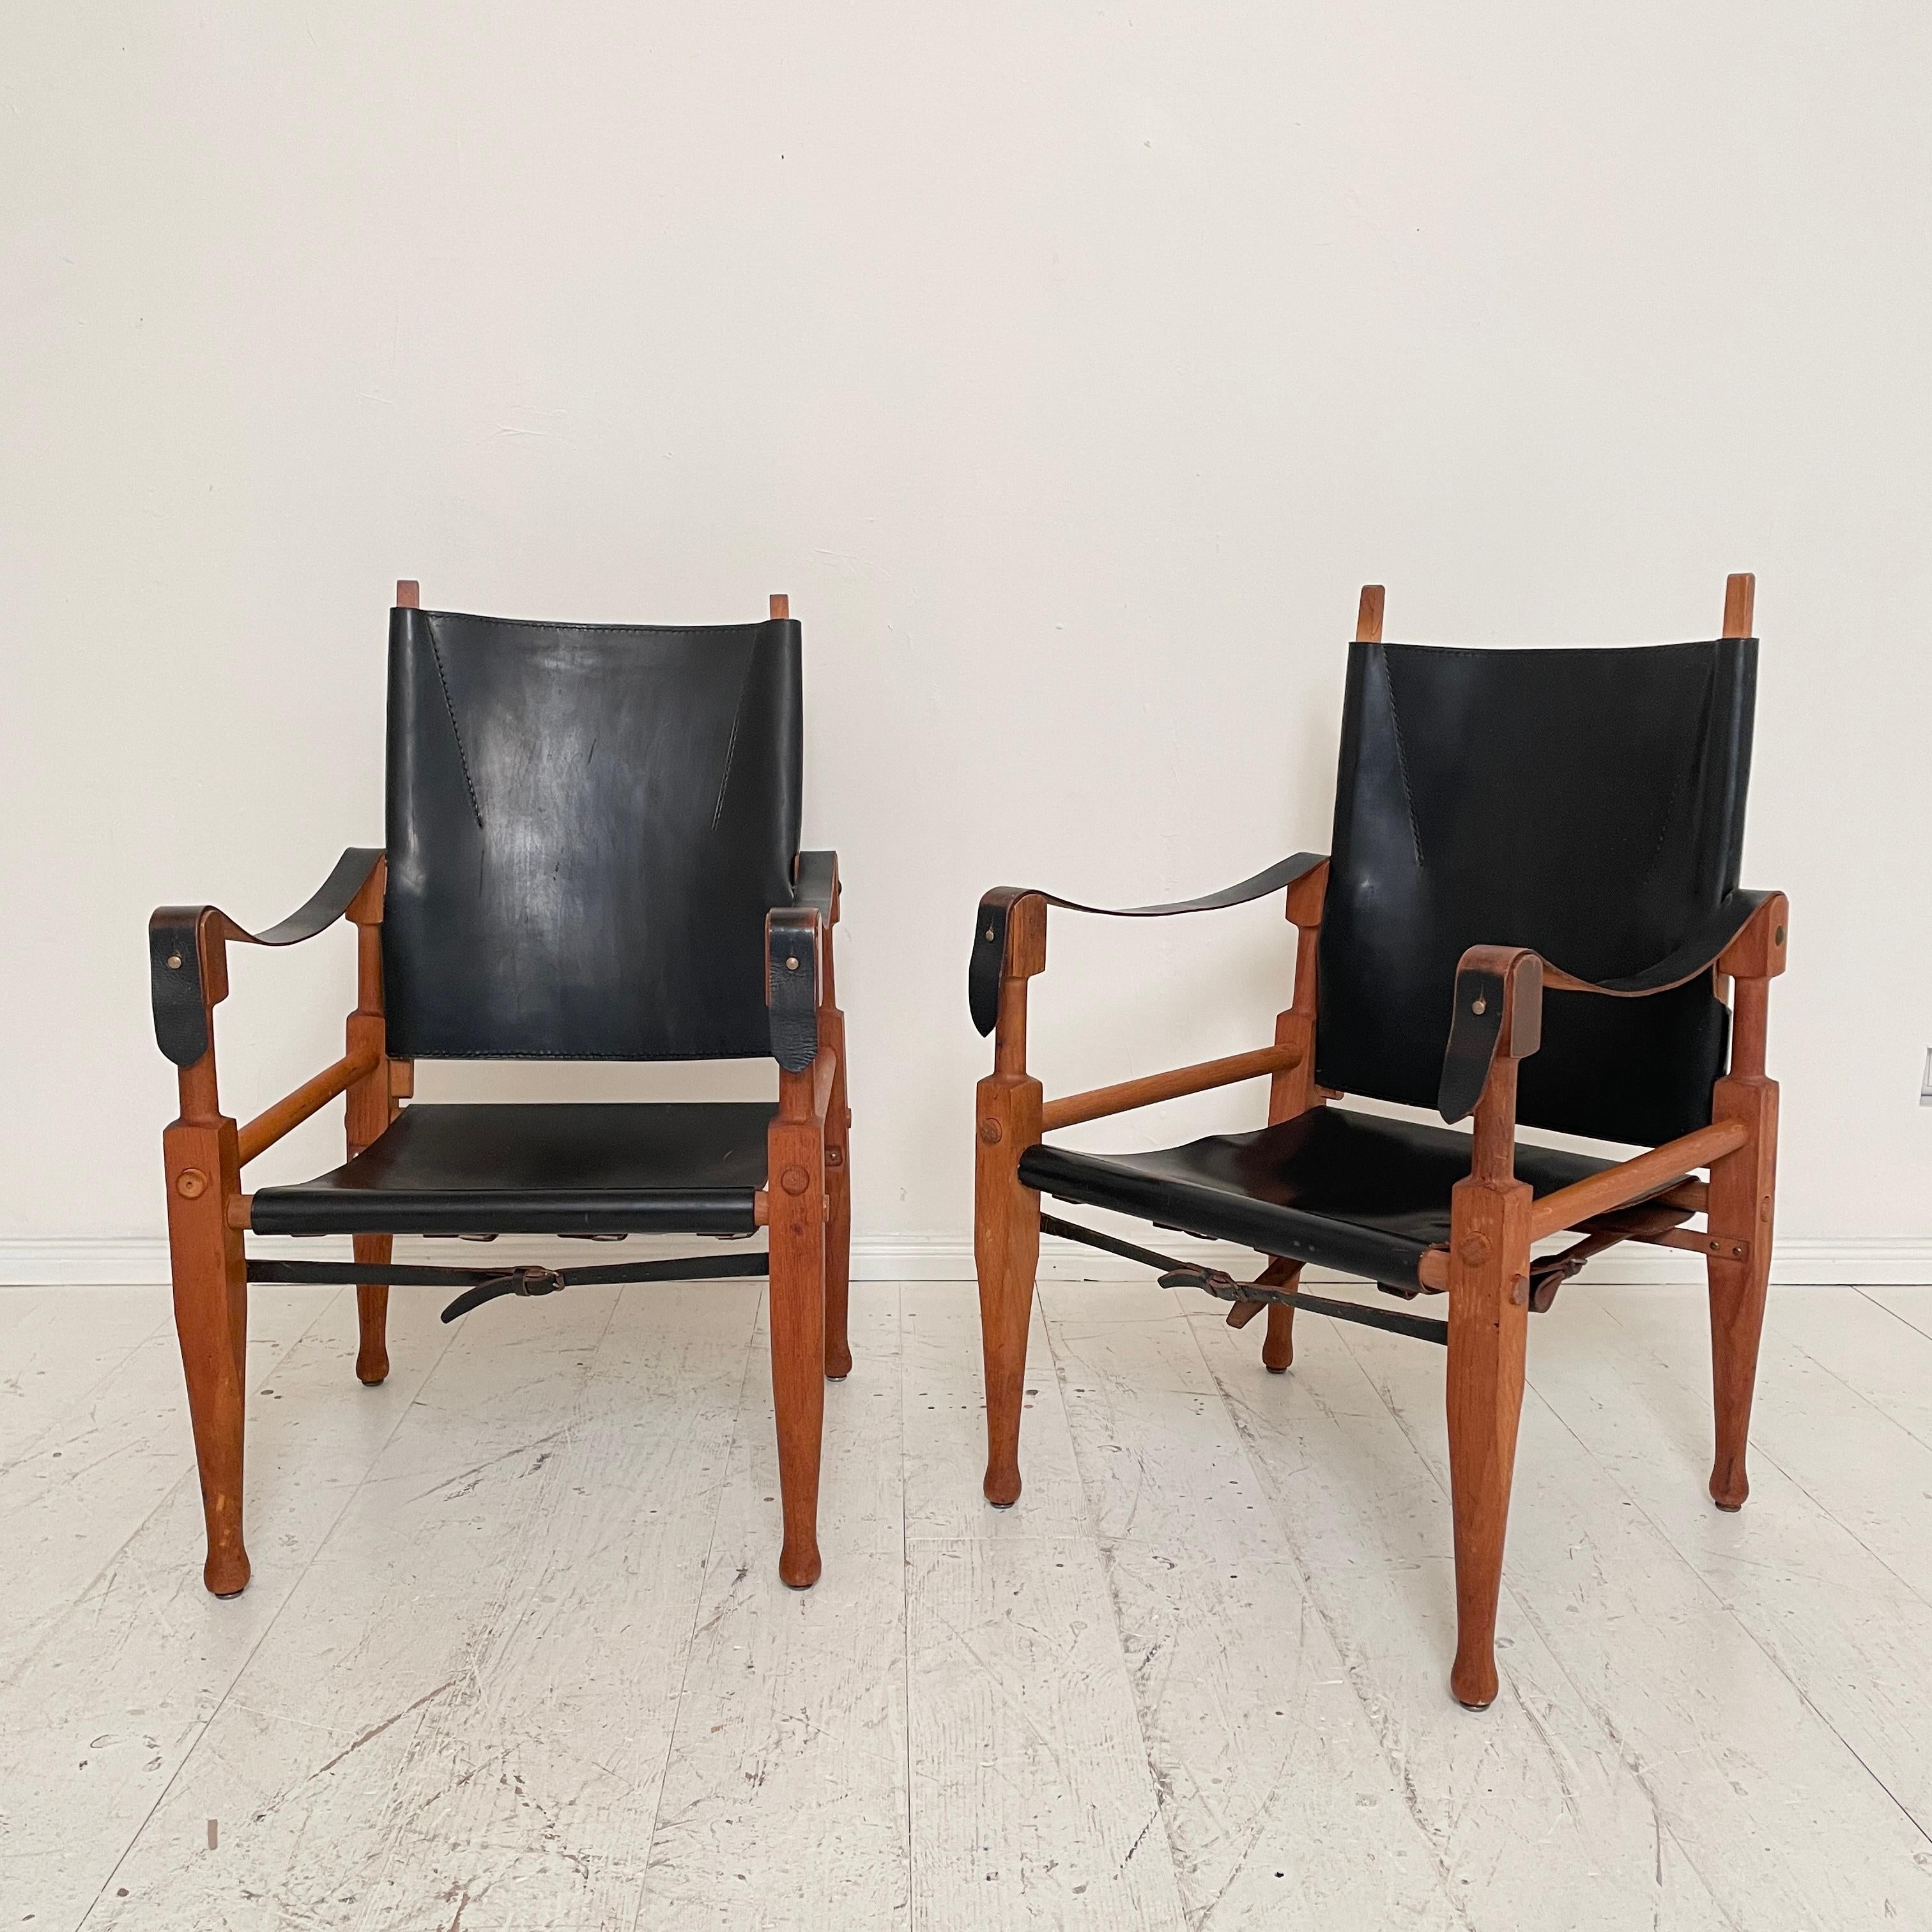 This beautiful pair of mid-century Safari armchairs by Wilhelm Kienzle for Wohnbedarf from the 1950s are made of black leather and oak. 
They are in great original condition.
A unique piece which is a great eye-catcher for your antique, modern,